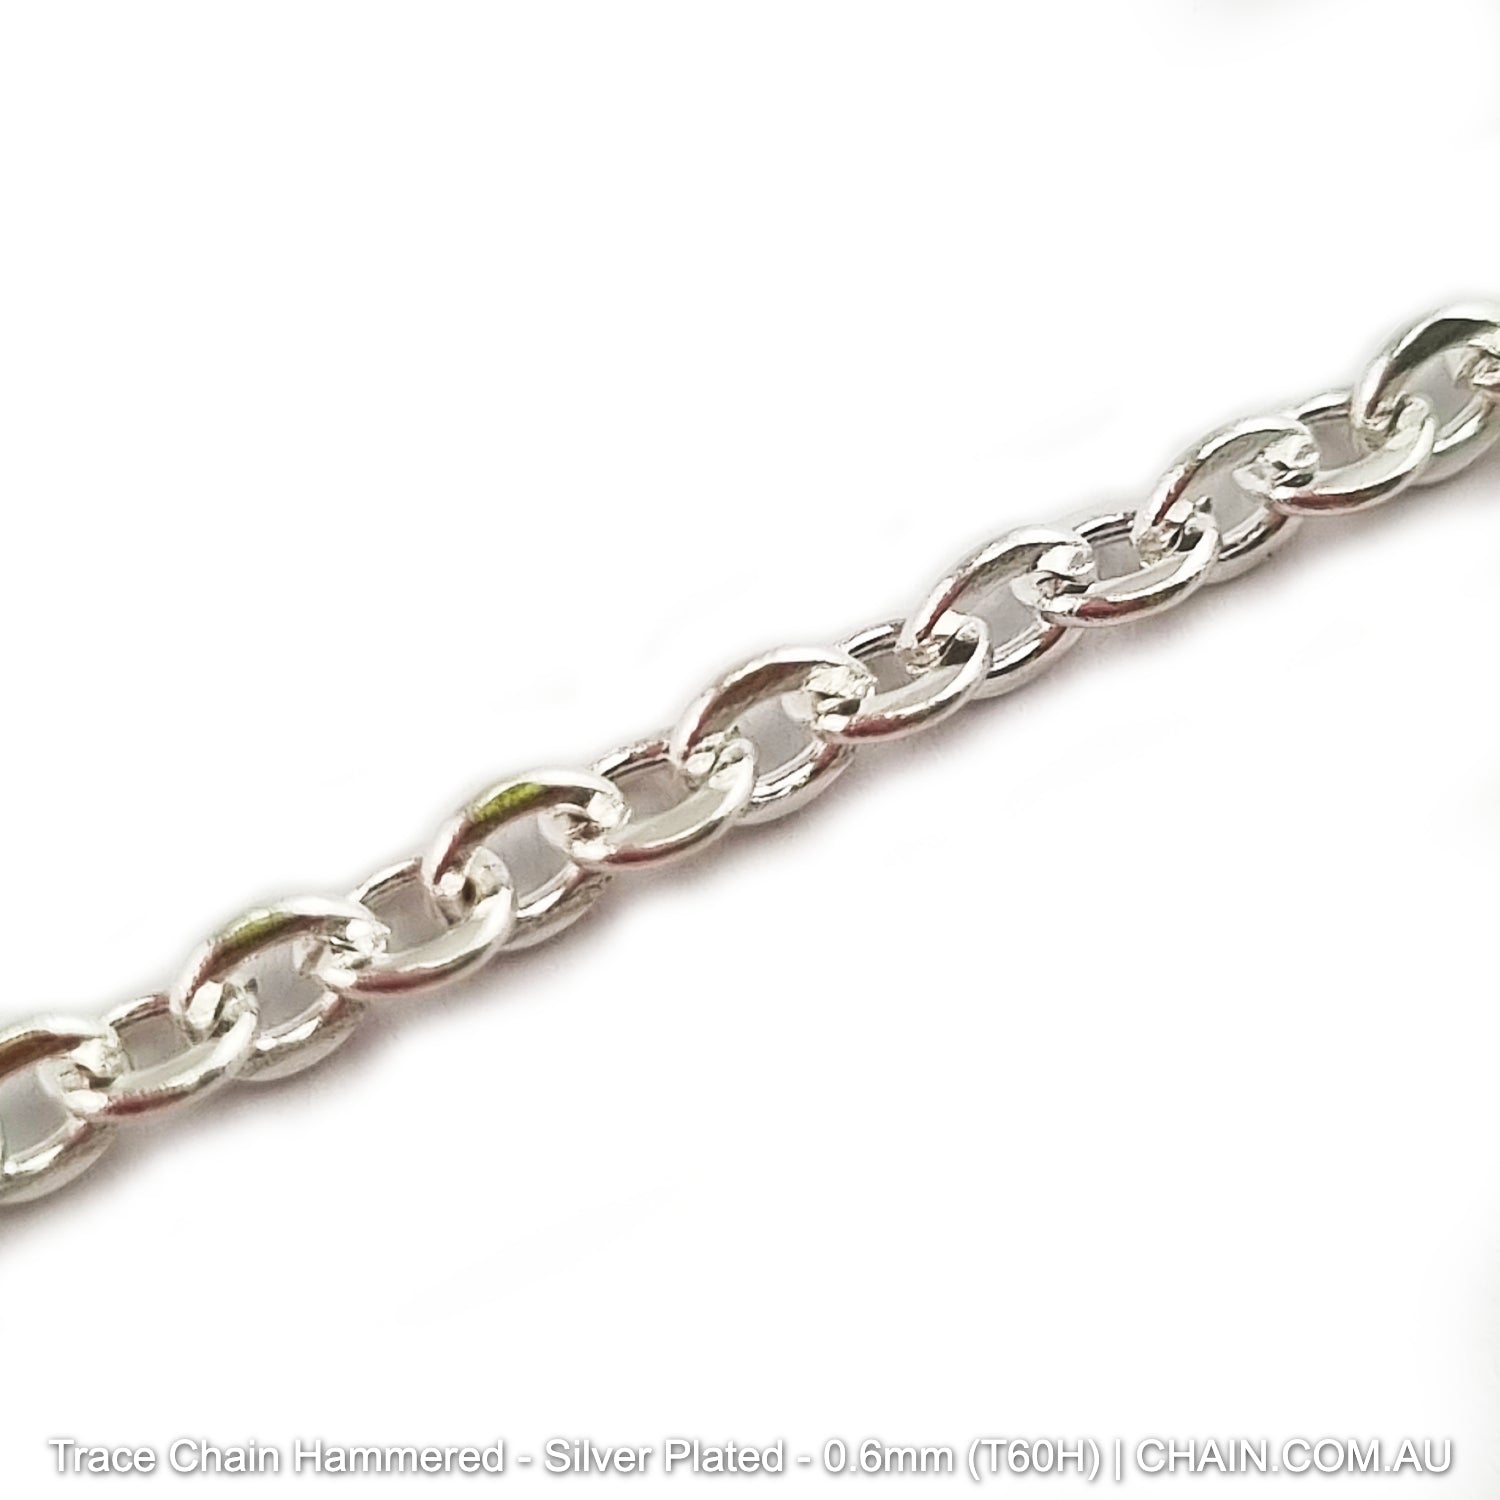 Hammered Trace Chain in a Silver Plated Finish. Size: 0.6mm, T60H. Jewellery Chain, Australia wide shipping. Shop chain.com.au